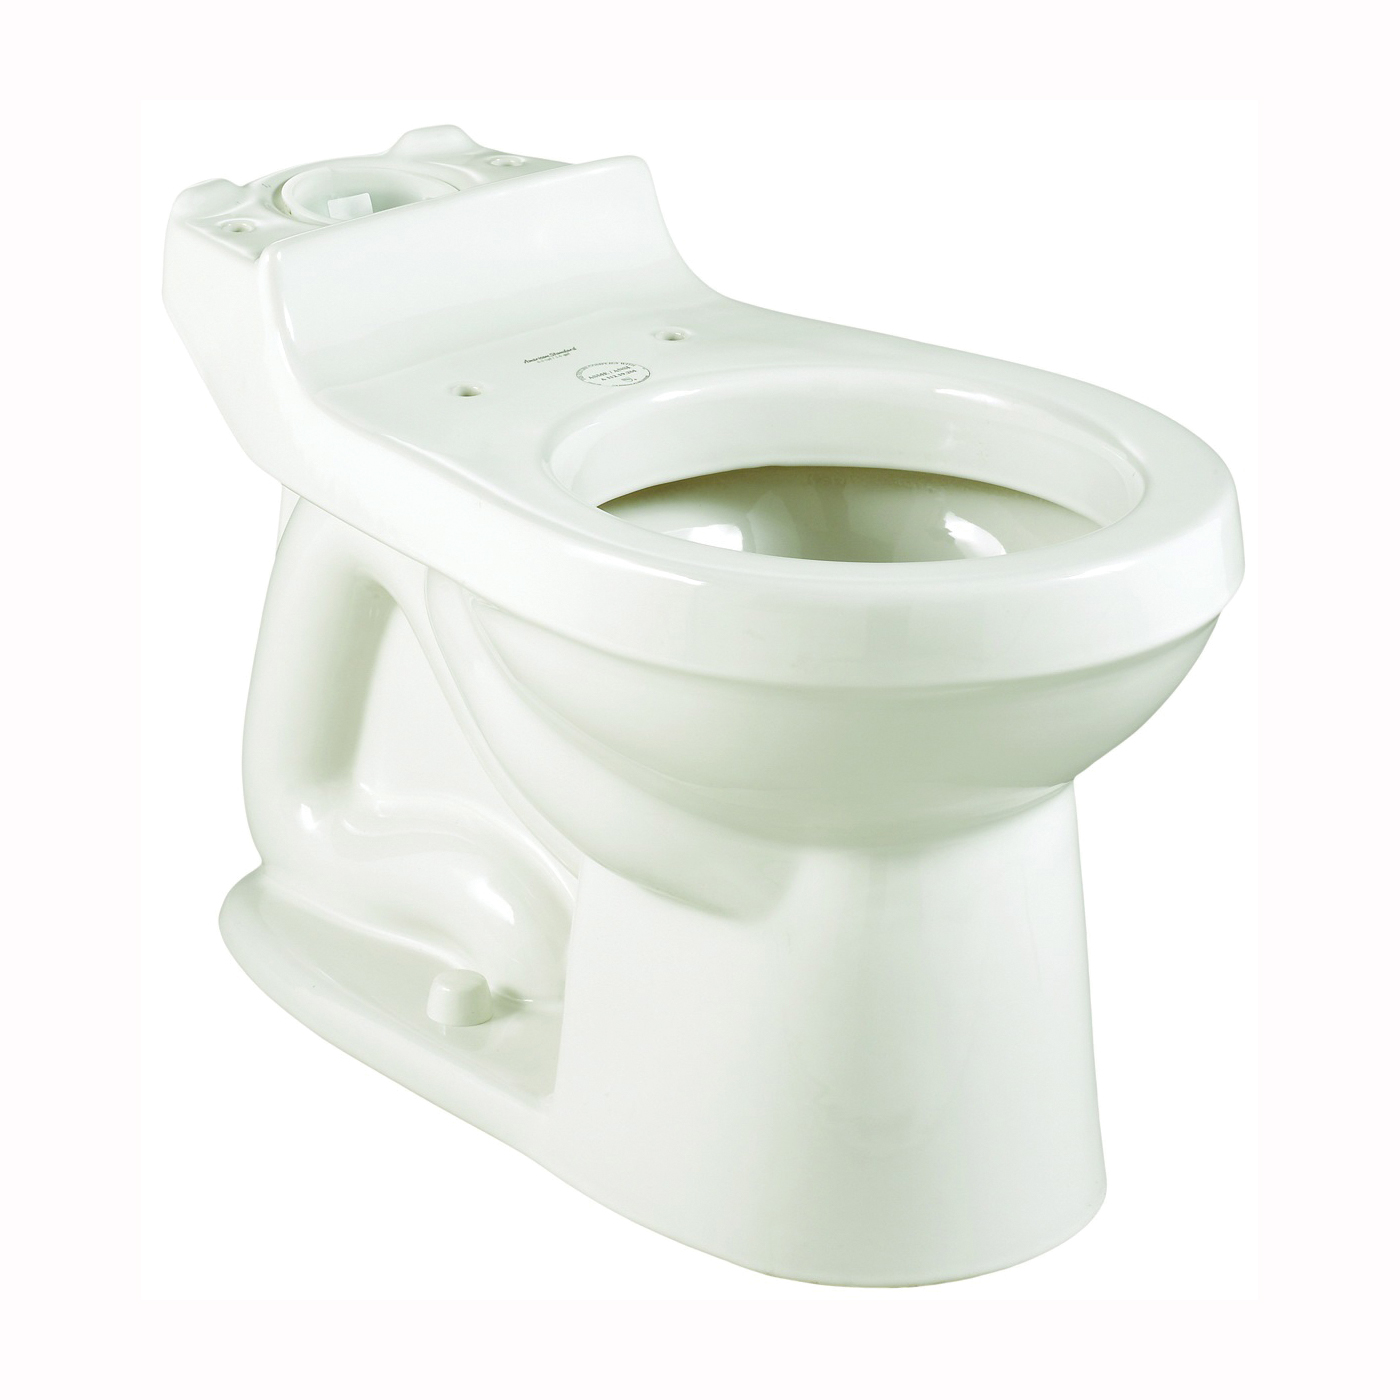 Champion Series 3395A001.020 Toilet Bowl, Elongated, 1.6 gpf Flush, 12 in Rough-In, Vitreous China